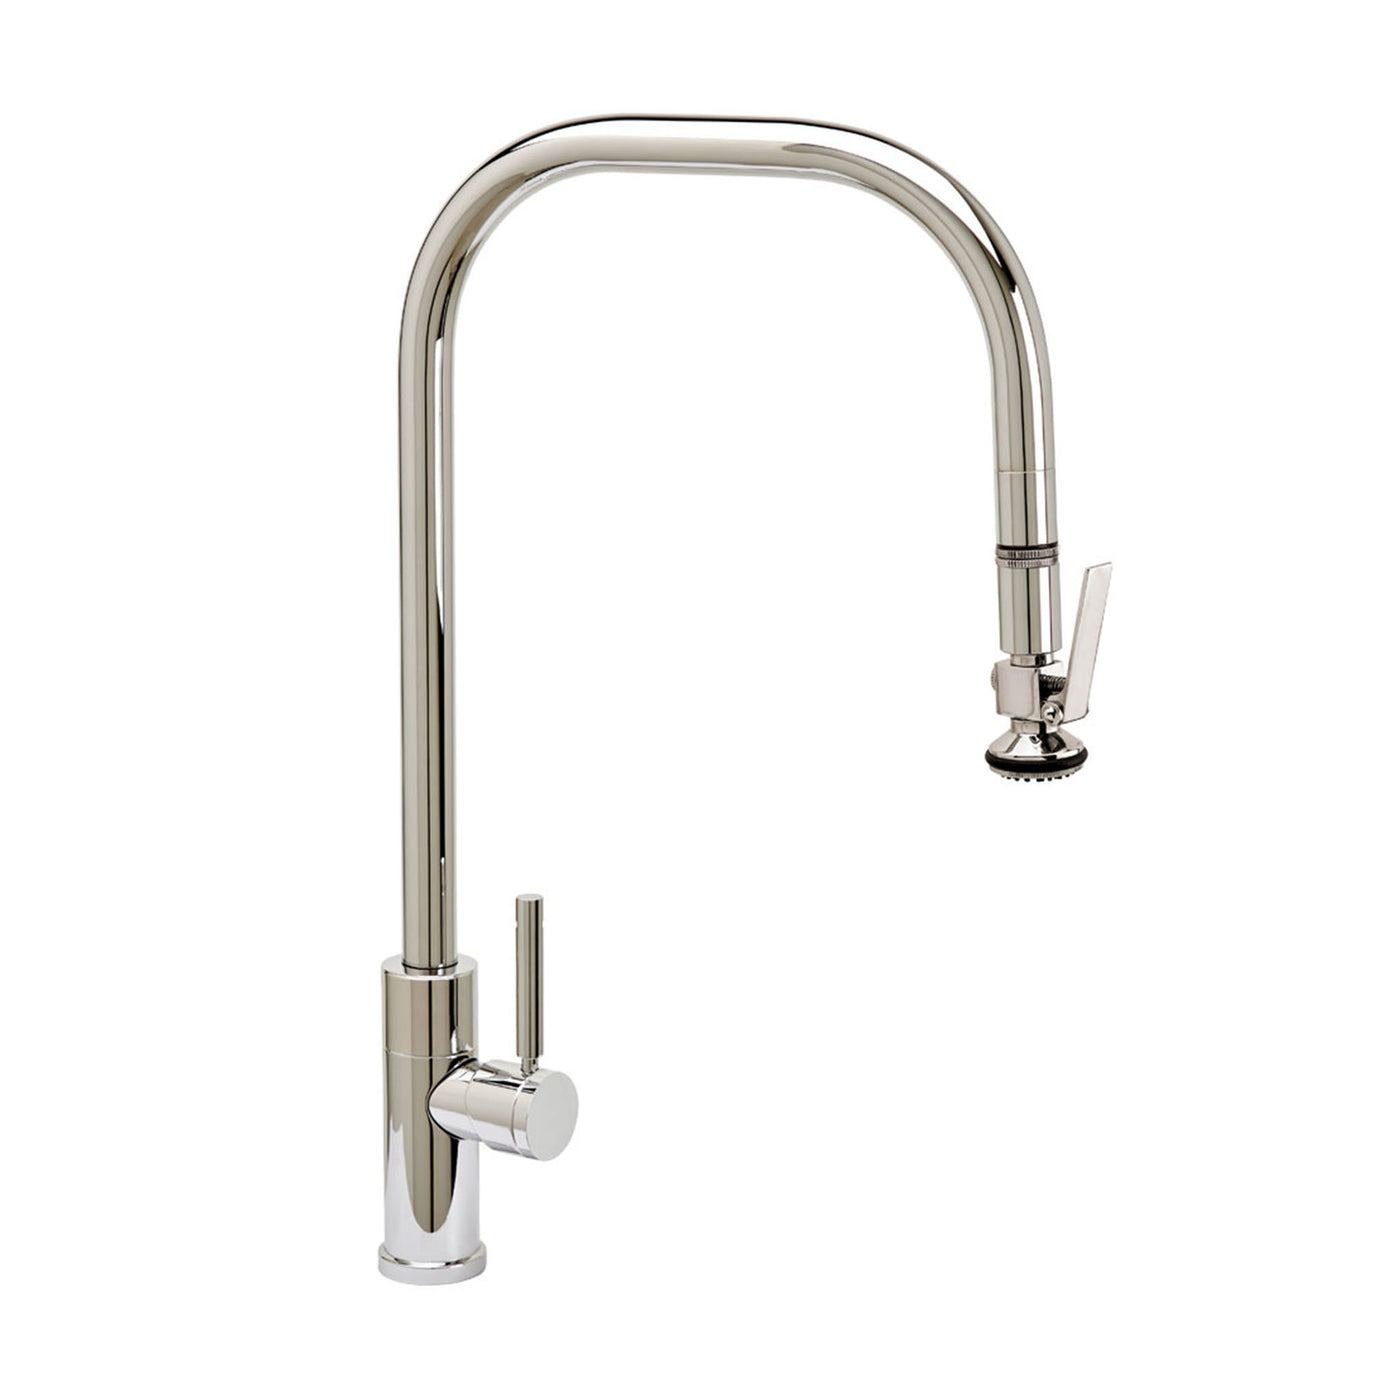 Fulton Modern Extended Reach PLP Pulldown Faucet - Toggle Sprayer